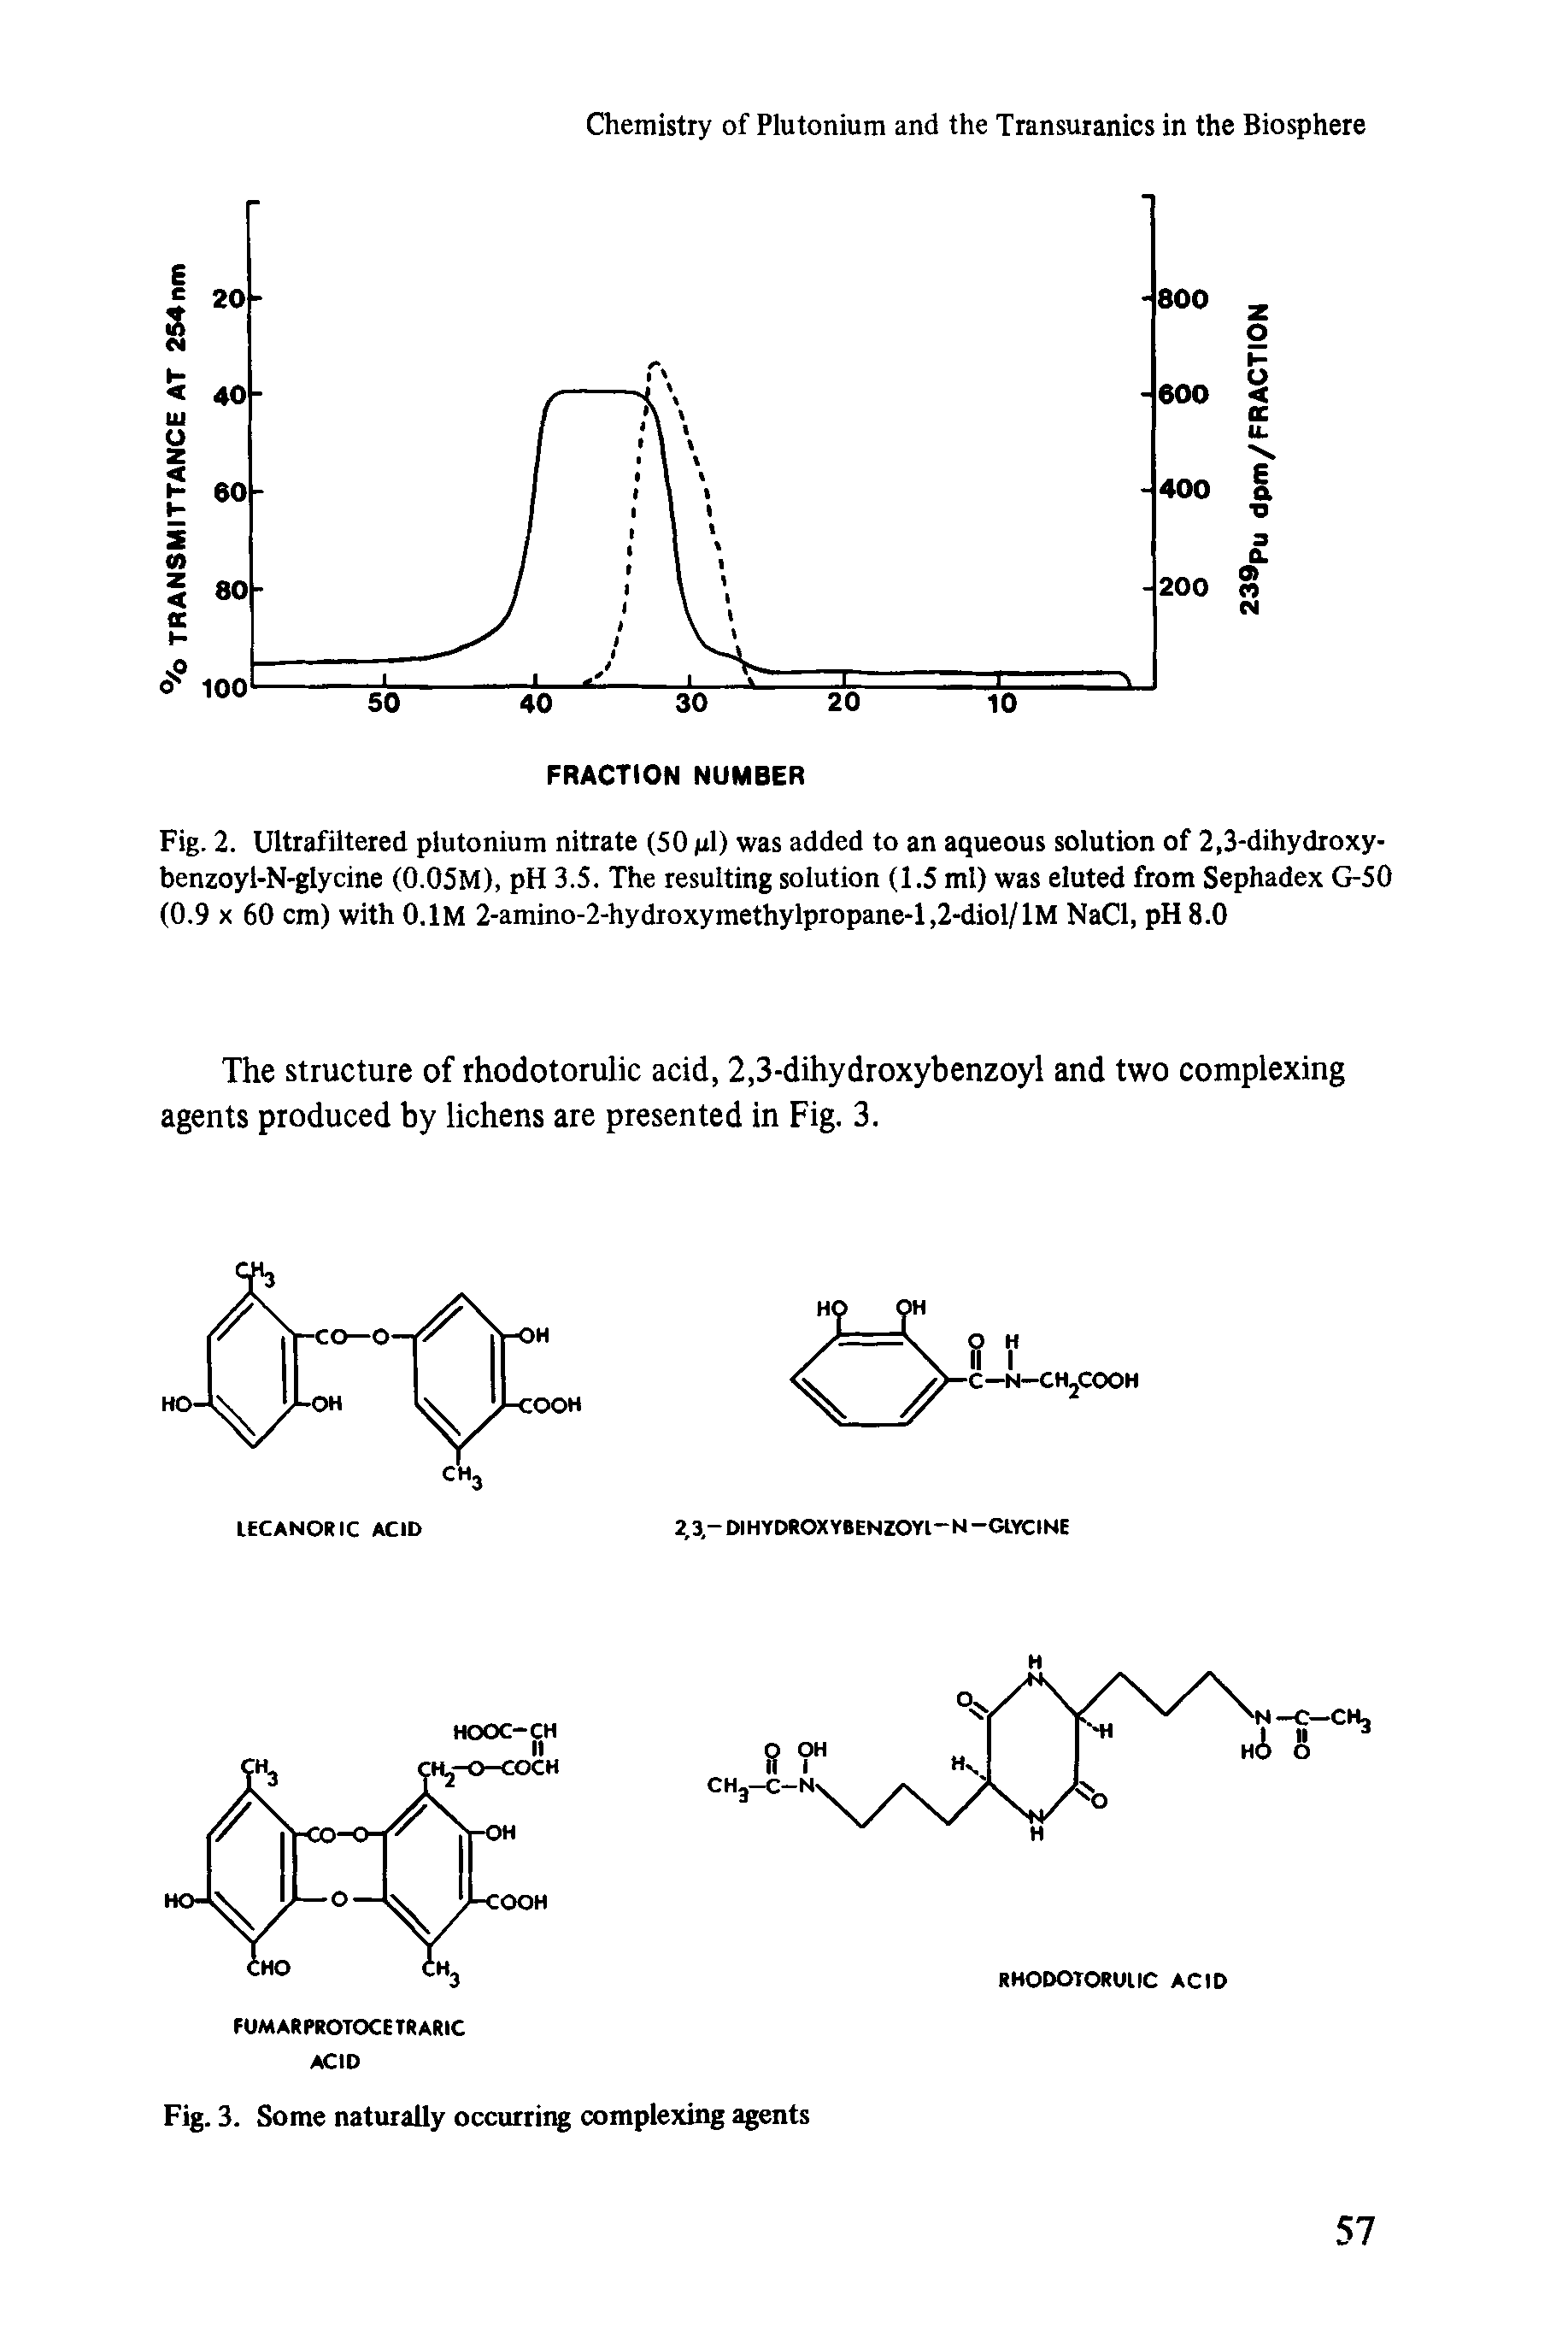 Fig. 2. Ultrafiltered plutonium nitrate (50 pi) was added to an aqueous solution of 2,3-dihydroxy-benzoyl-N-glycine (0.05M), pH 3.5. The resulting solution (1.5 ml) was eluted from Sephadex G-50 (0.9 x 60 cm) with 0.1M 2-amino-2-hydroxymethylpropane-l,2-diol/lM NaCl, pH 8.0...